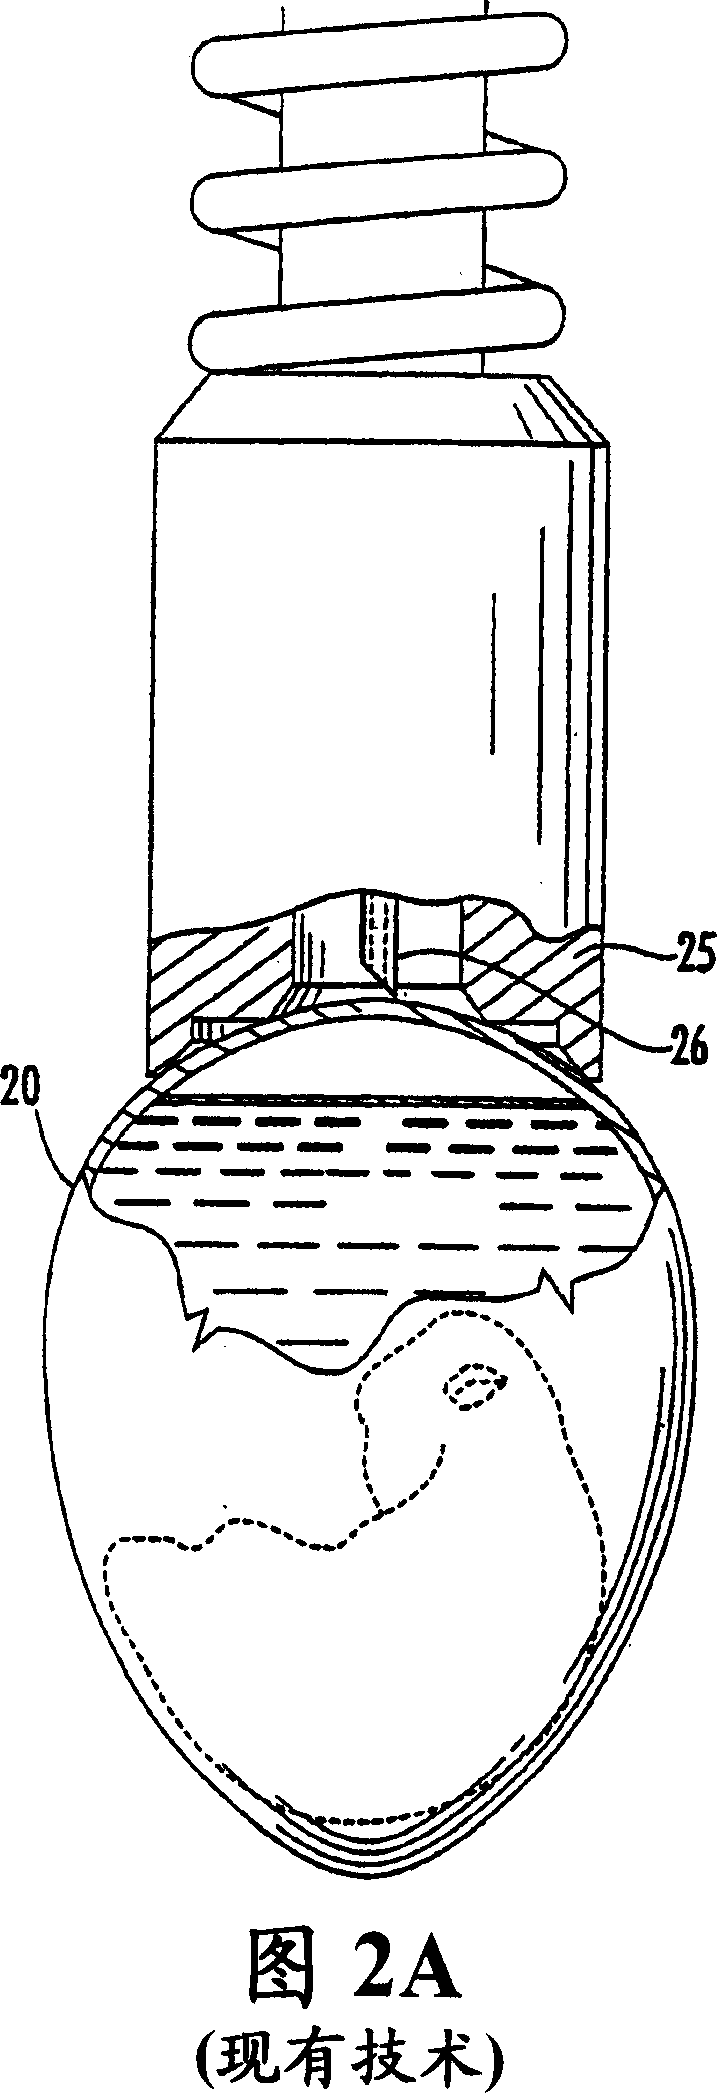 Methods and apparatus for punching through egg shells with reduced force